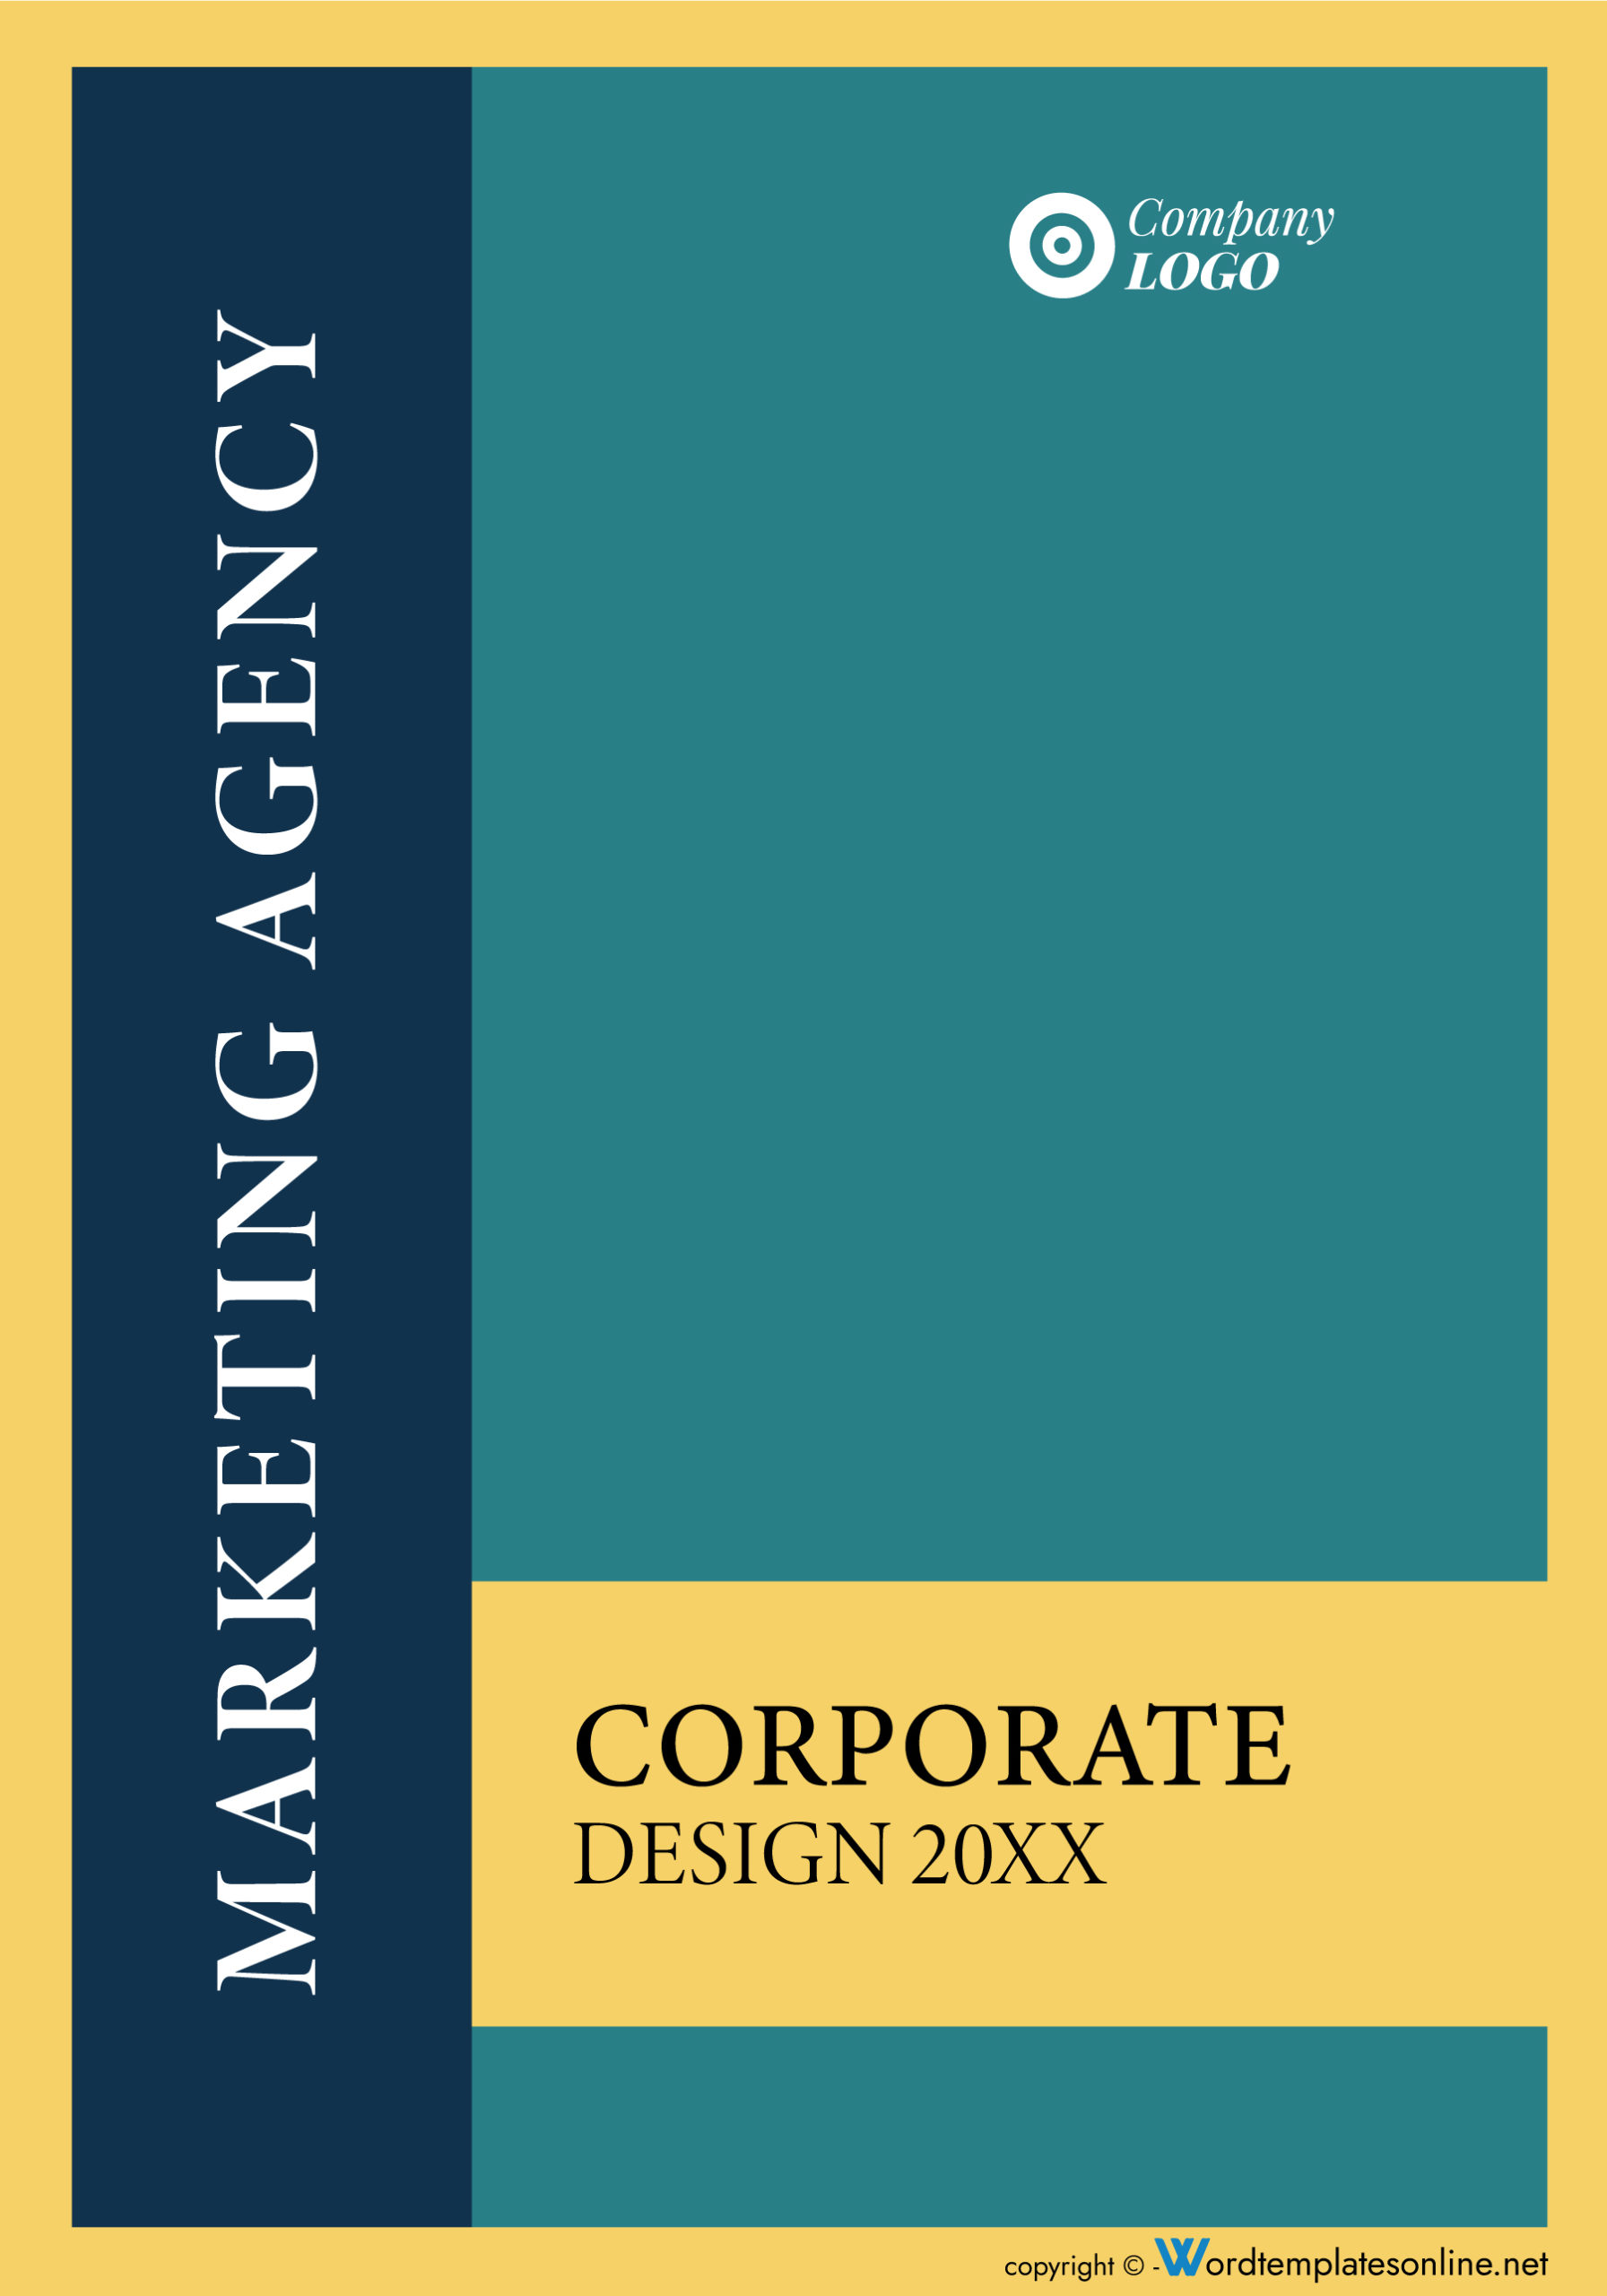 Marketing Agency Cover Page Template - Free Download